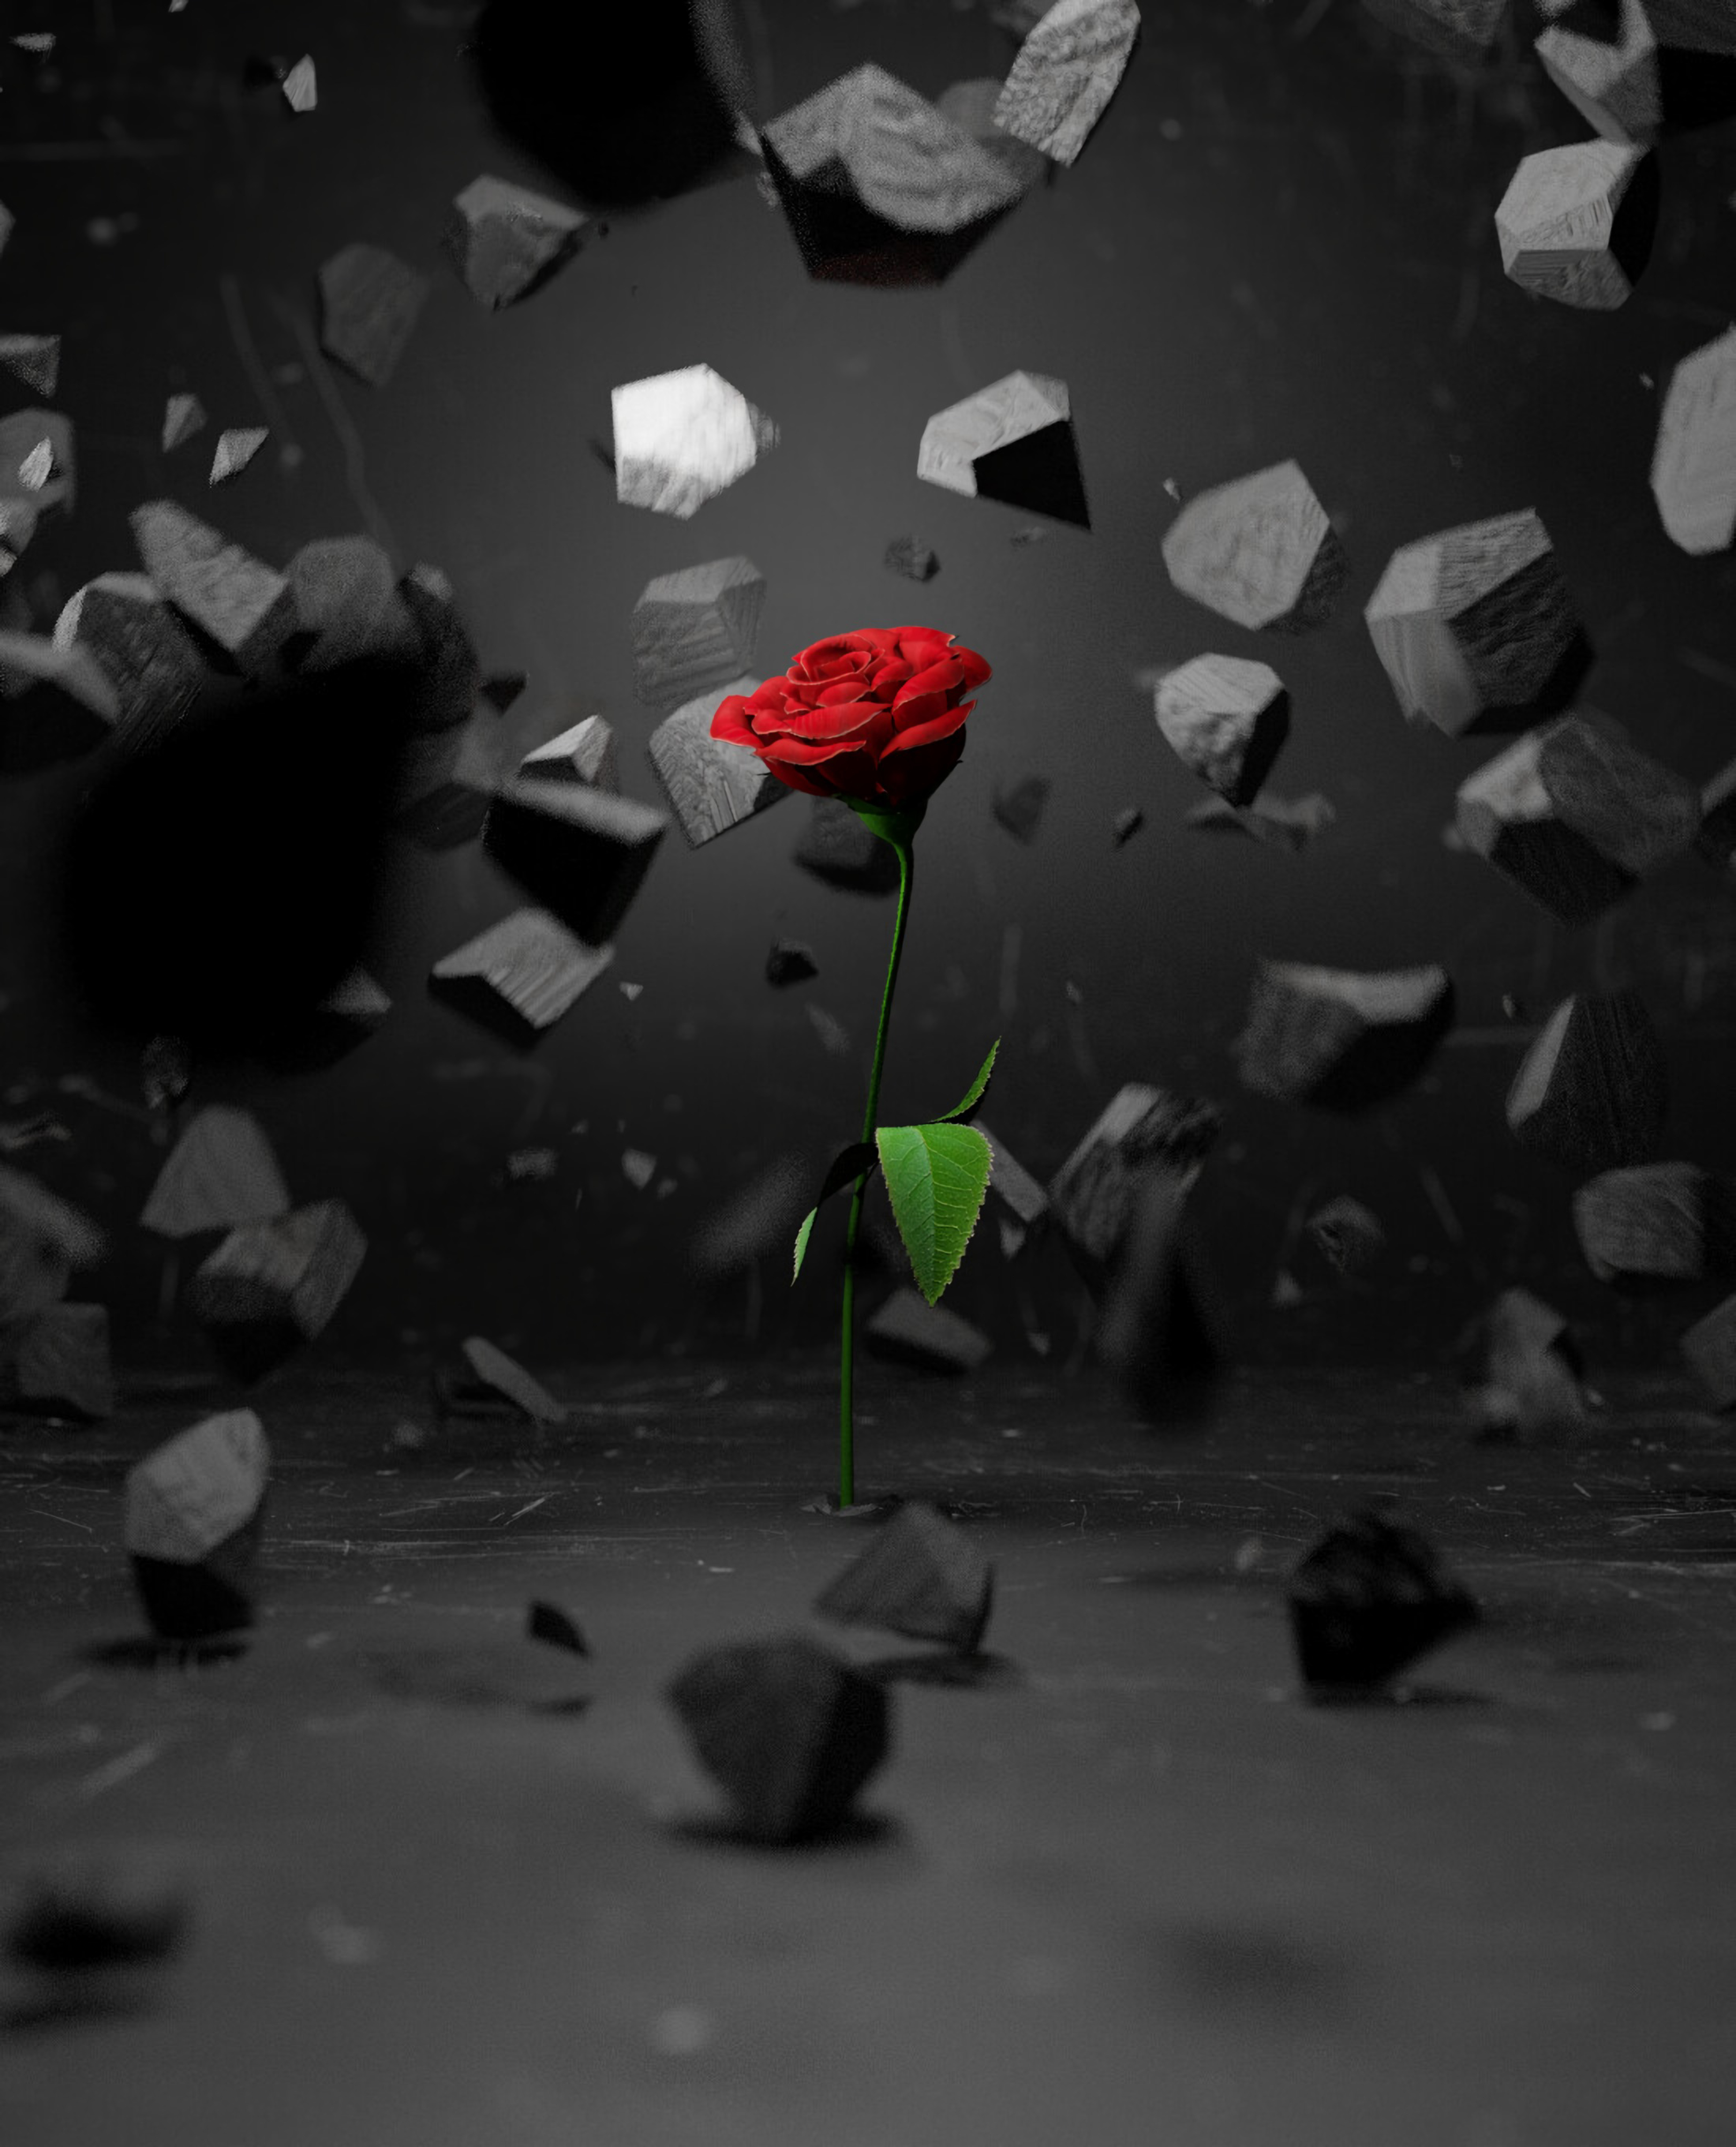 3d, stones, rose, rose flower, flower, smithereens, red, shards wallpapers for tablet